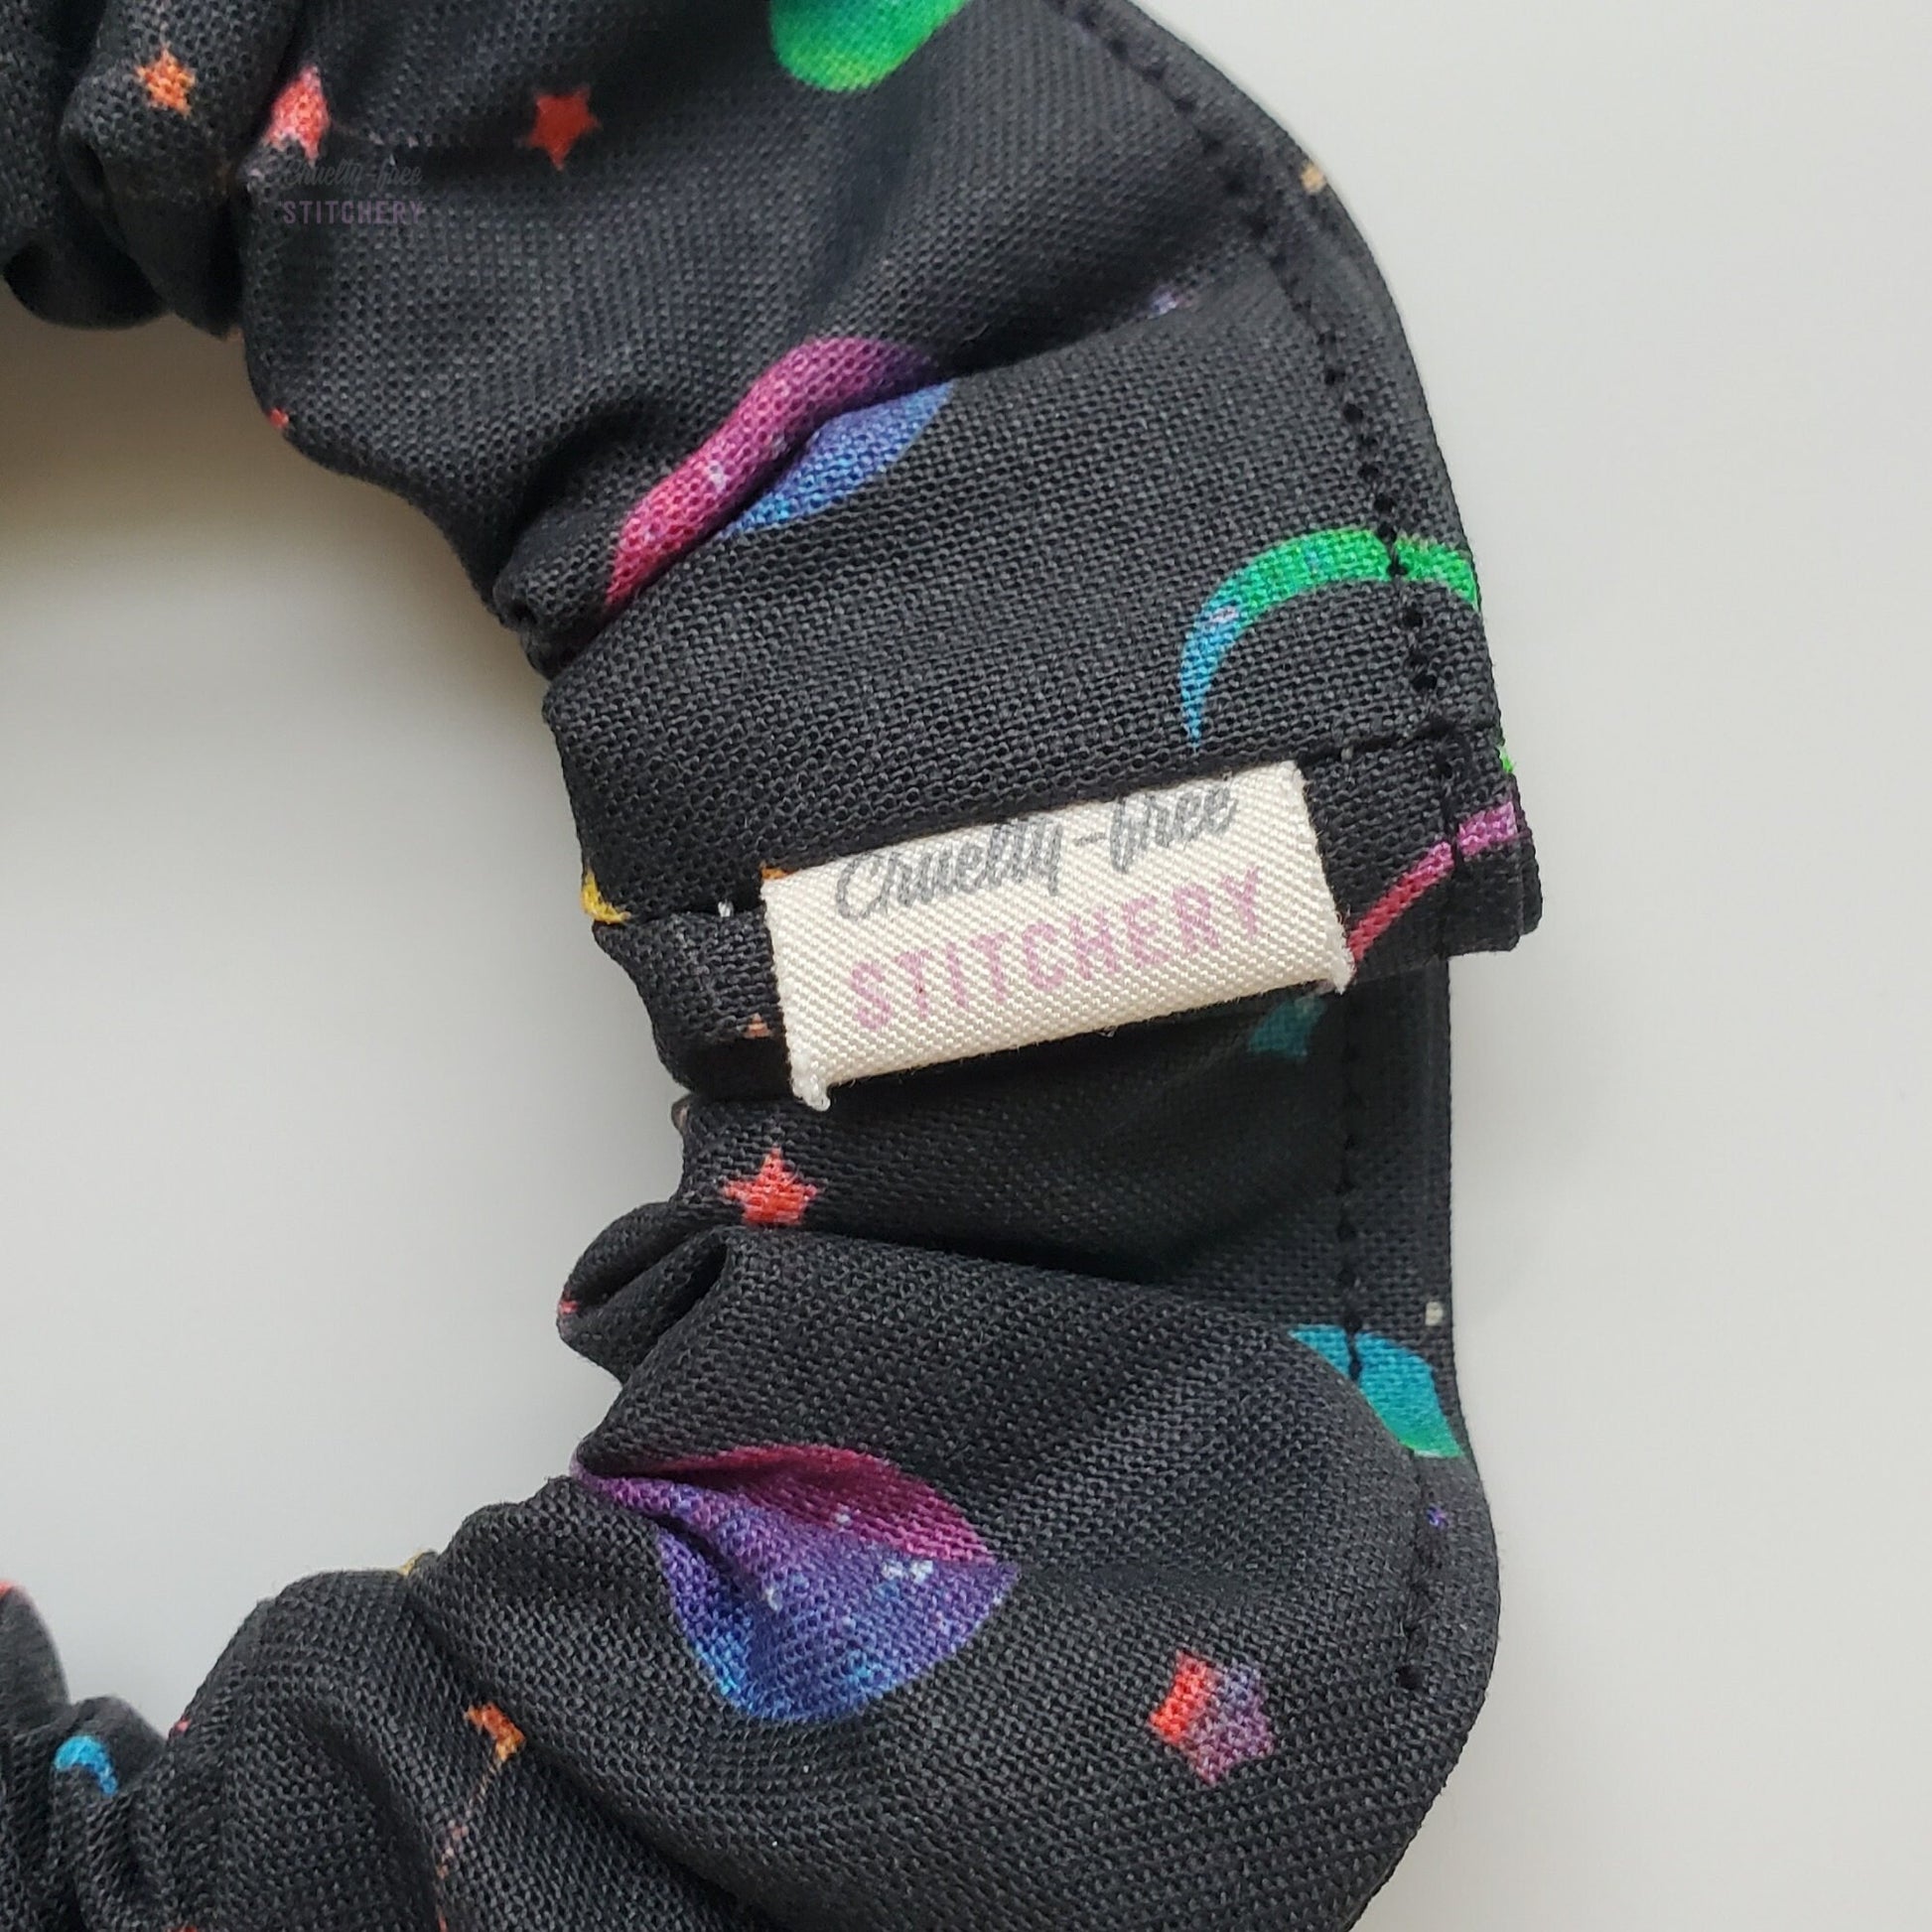 Close-up of the black with rainbow stars scrunchie with a small white tag with the Cruelty-Free Stitchery logo.